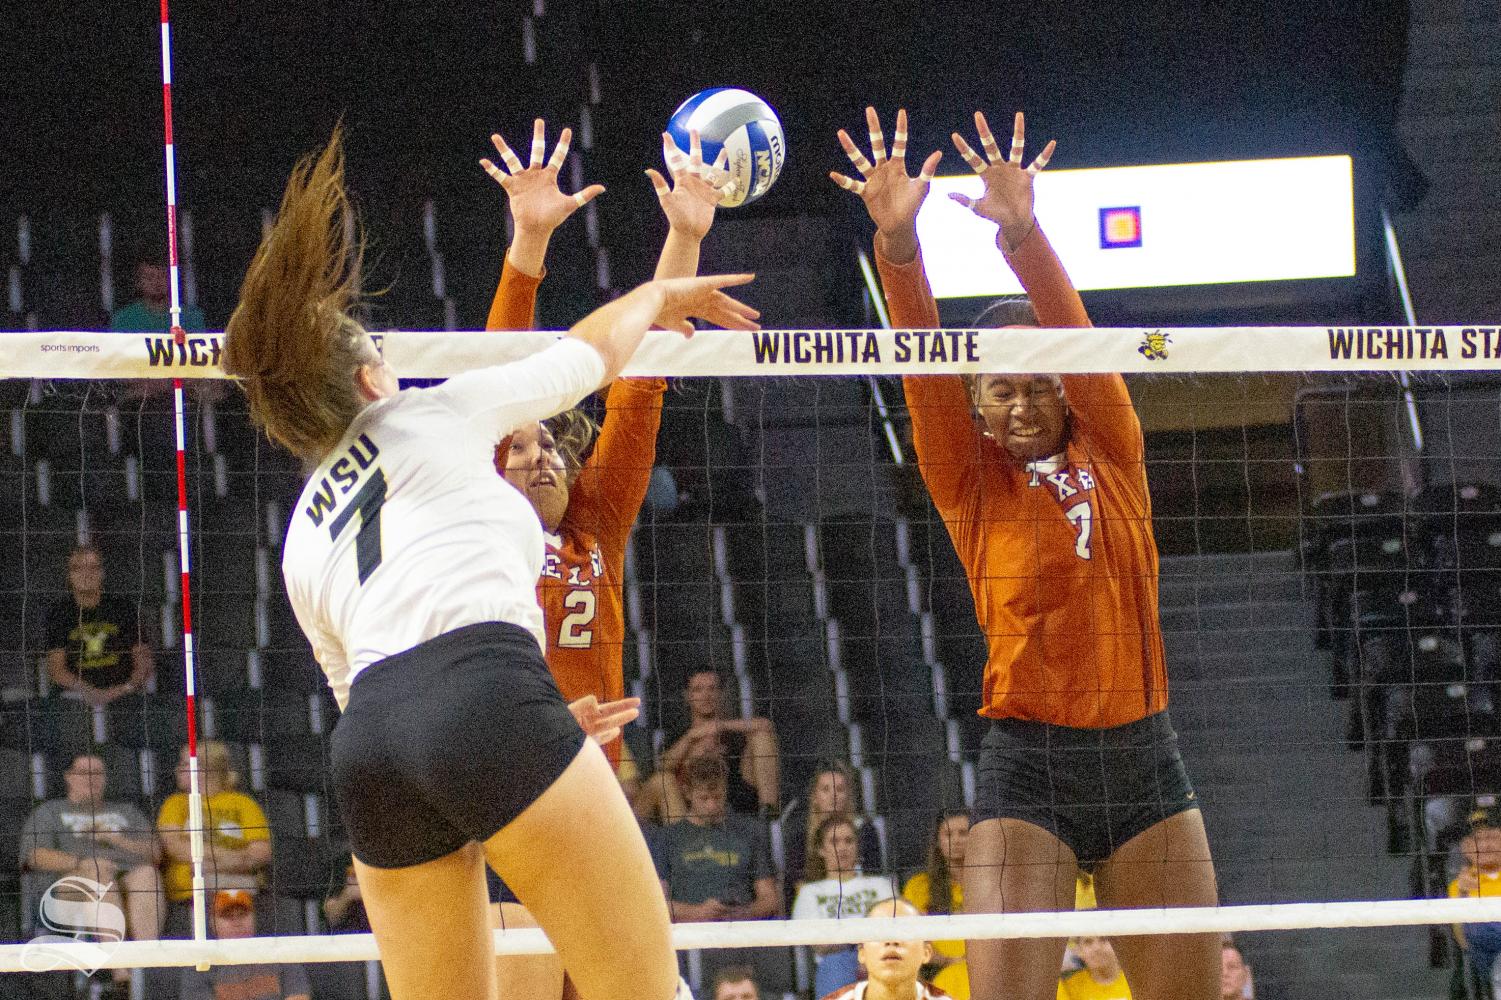 Wichita+State+freshman+Nicole+Anderson+follows+through+after+hitting+the+ball+against+Texas+on+Saturday+inside+Charles+Koch+Arena.